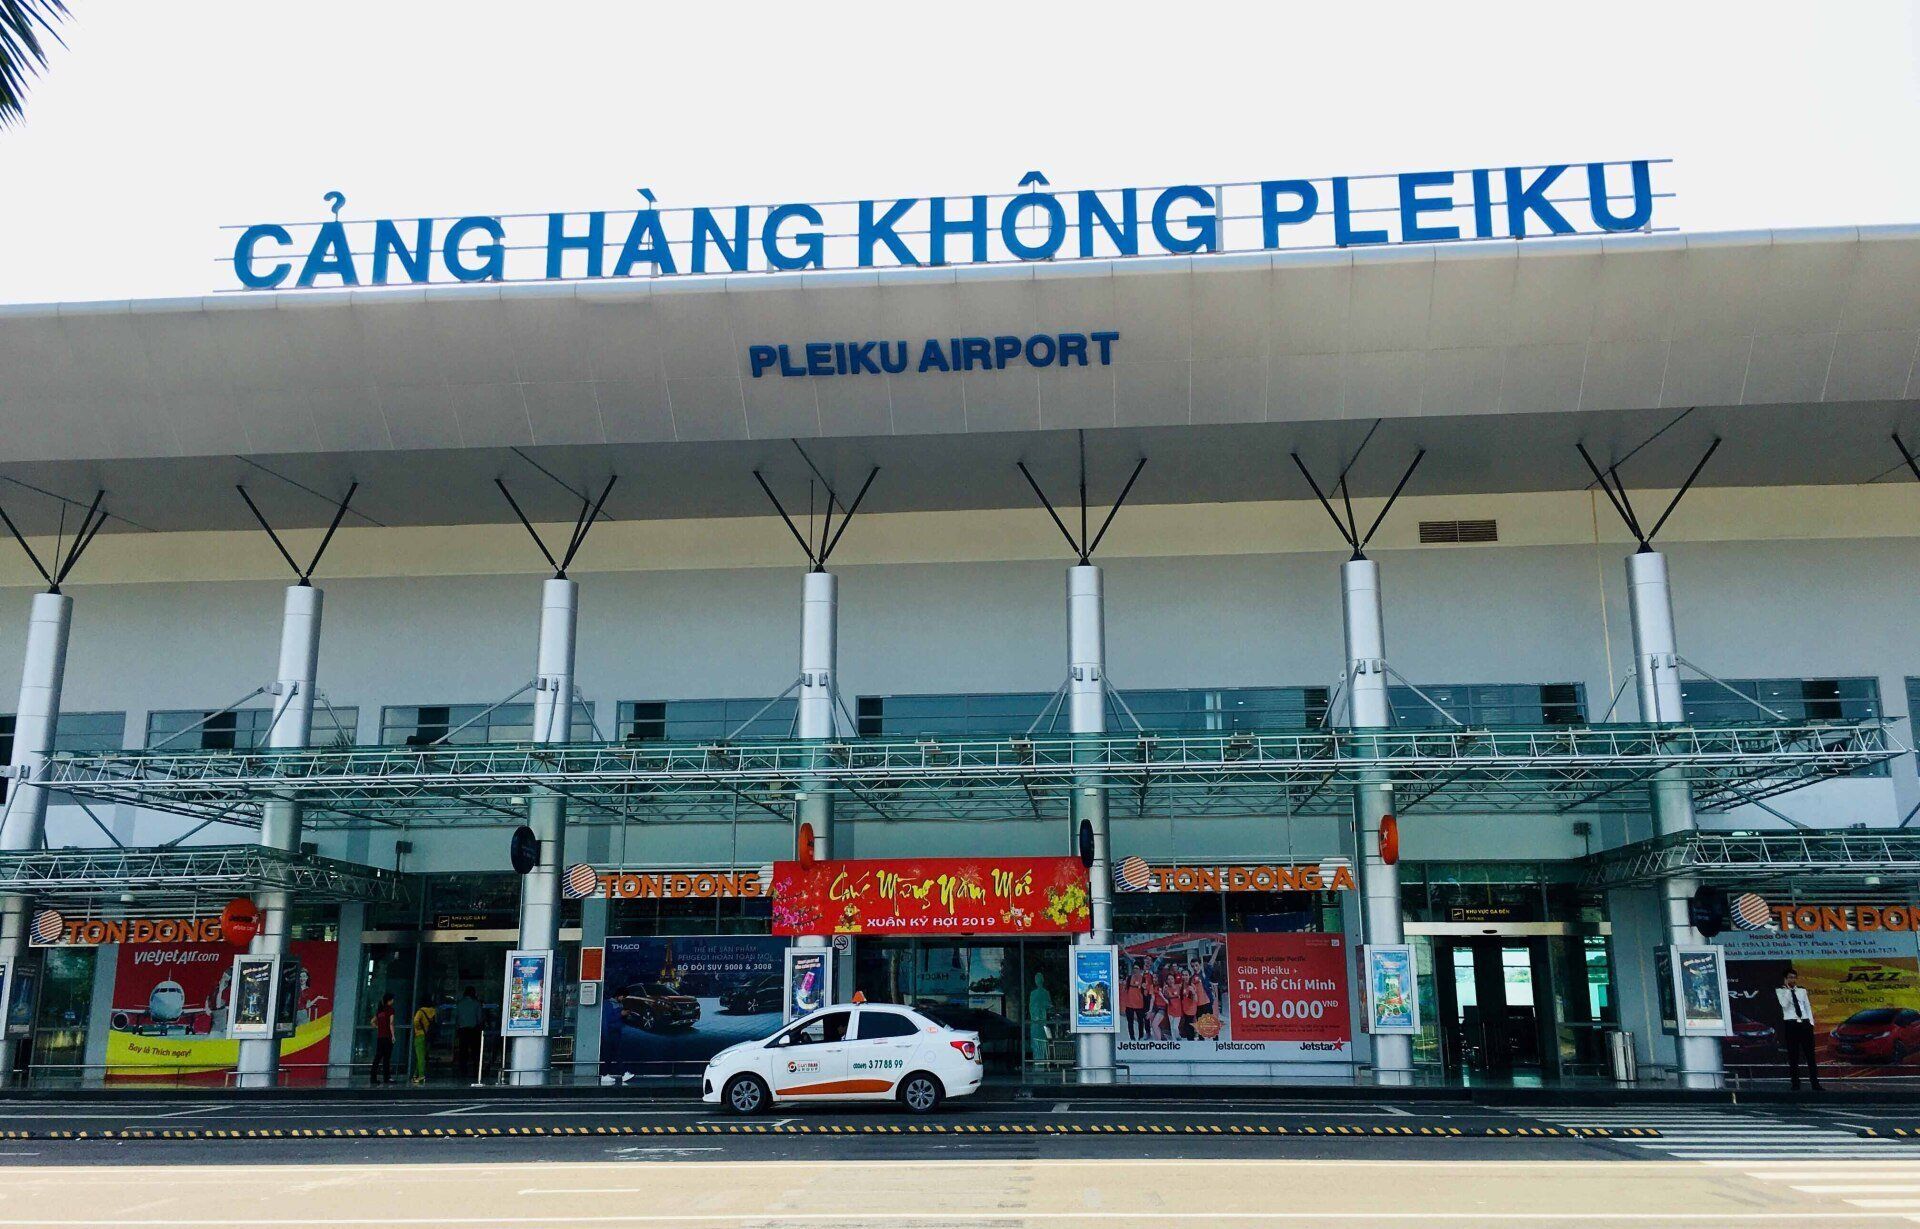 A white car is parked in front of the pleiku airport